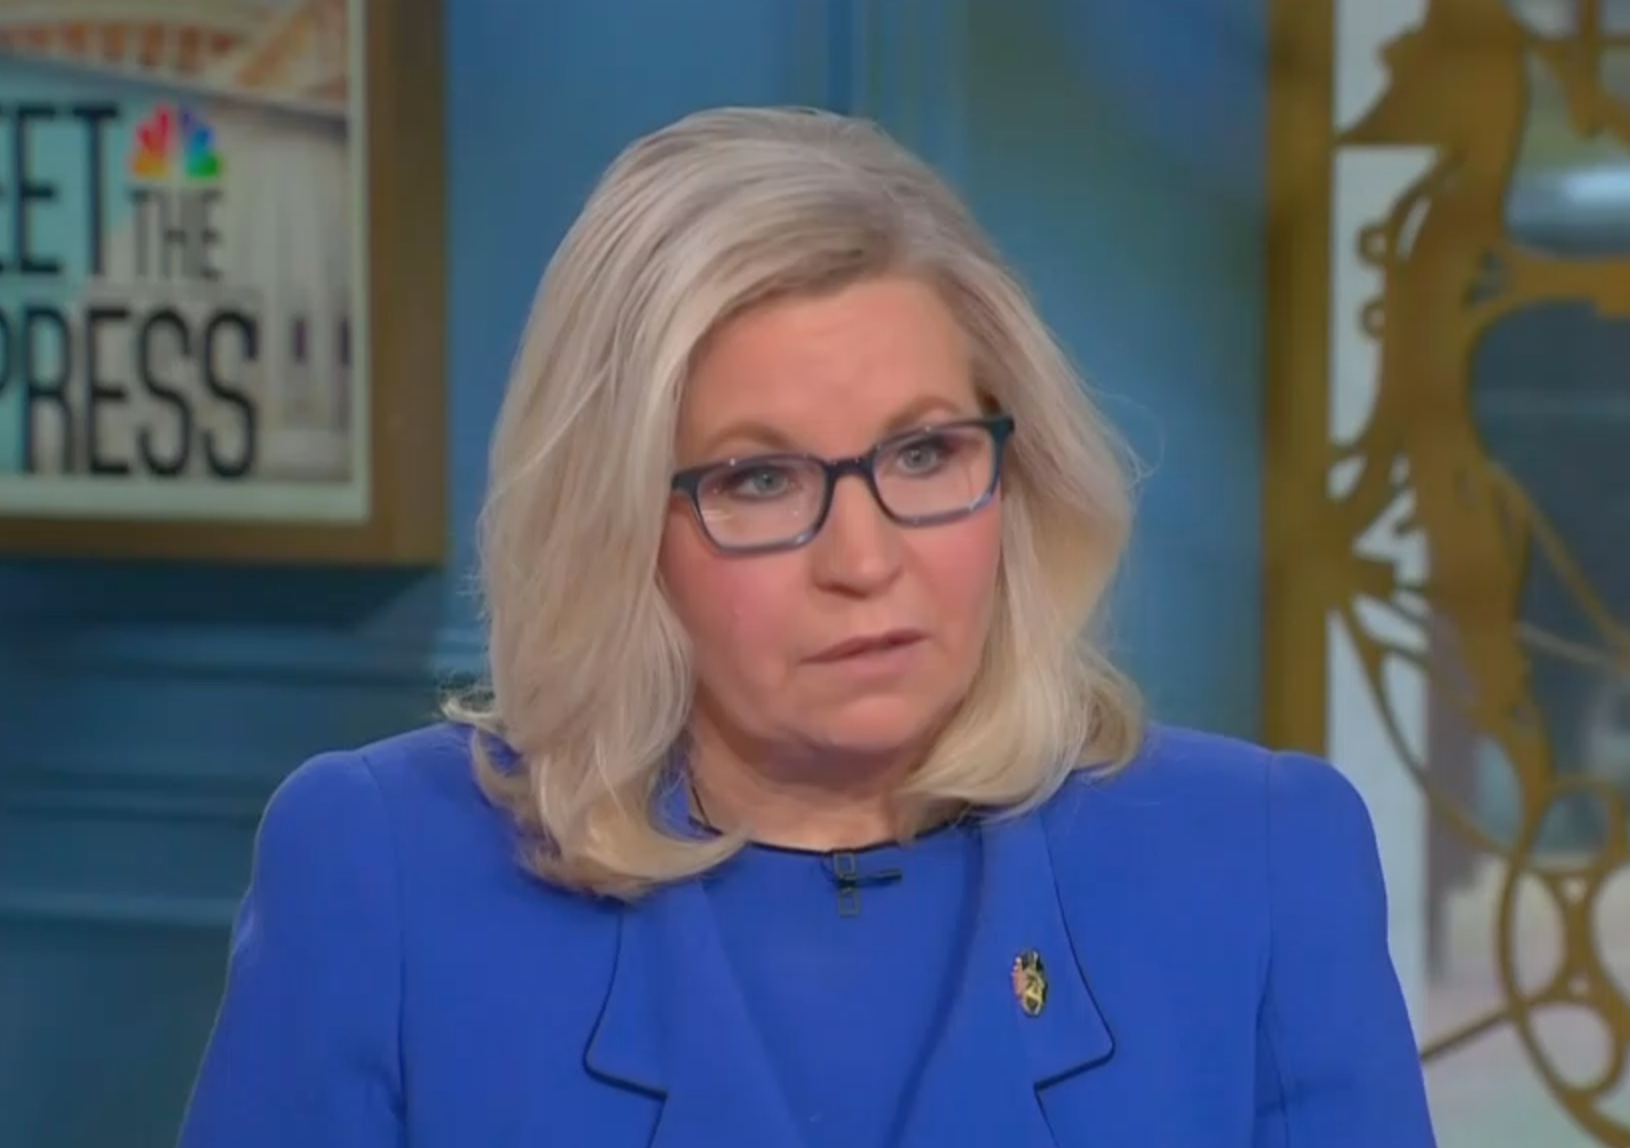 Liz Cheney Escalates Attacks On Jim Jordan: Republicans ‘Will Lose the House and They’ll Deserve It’ If He Becomes Speaker